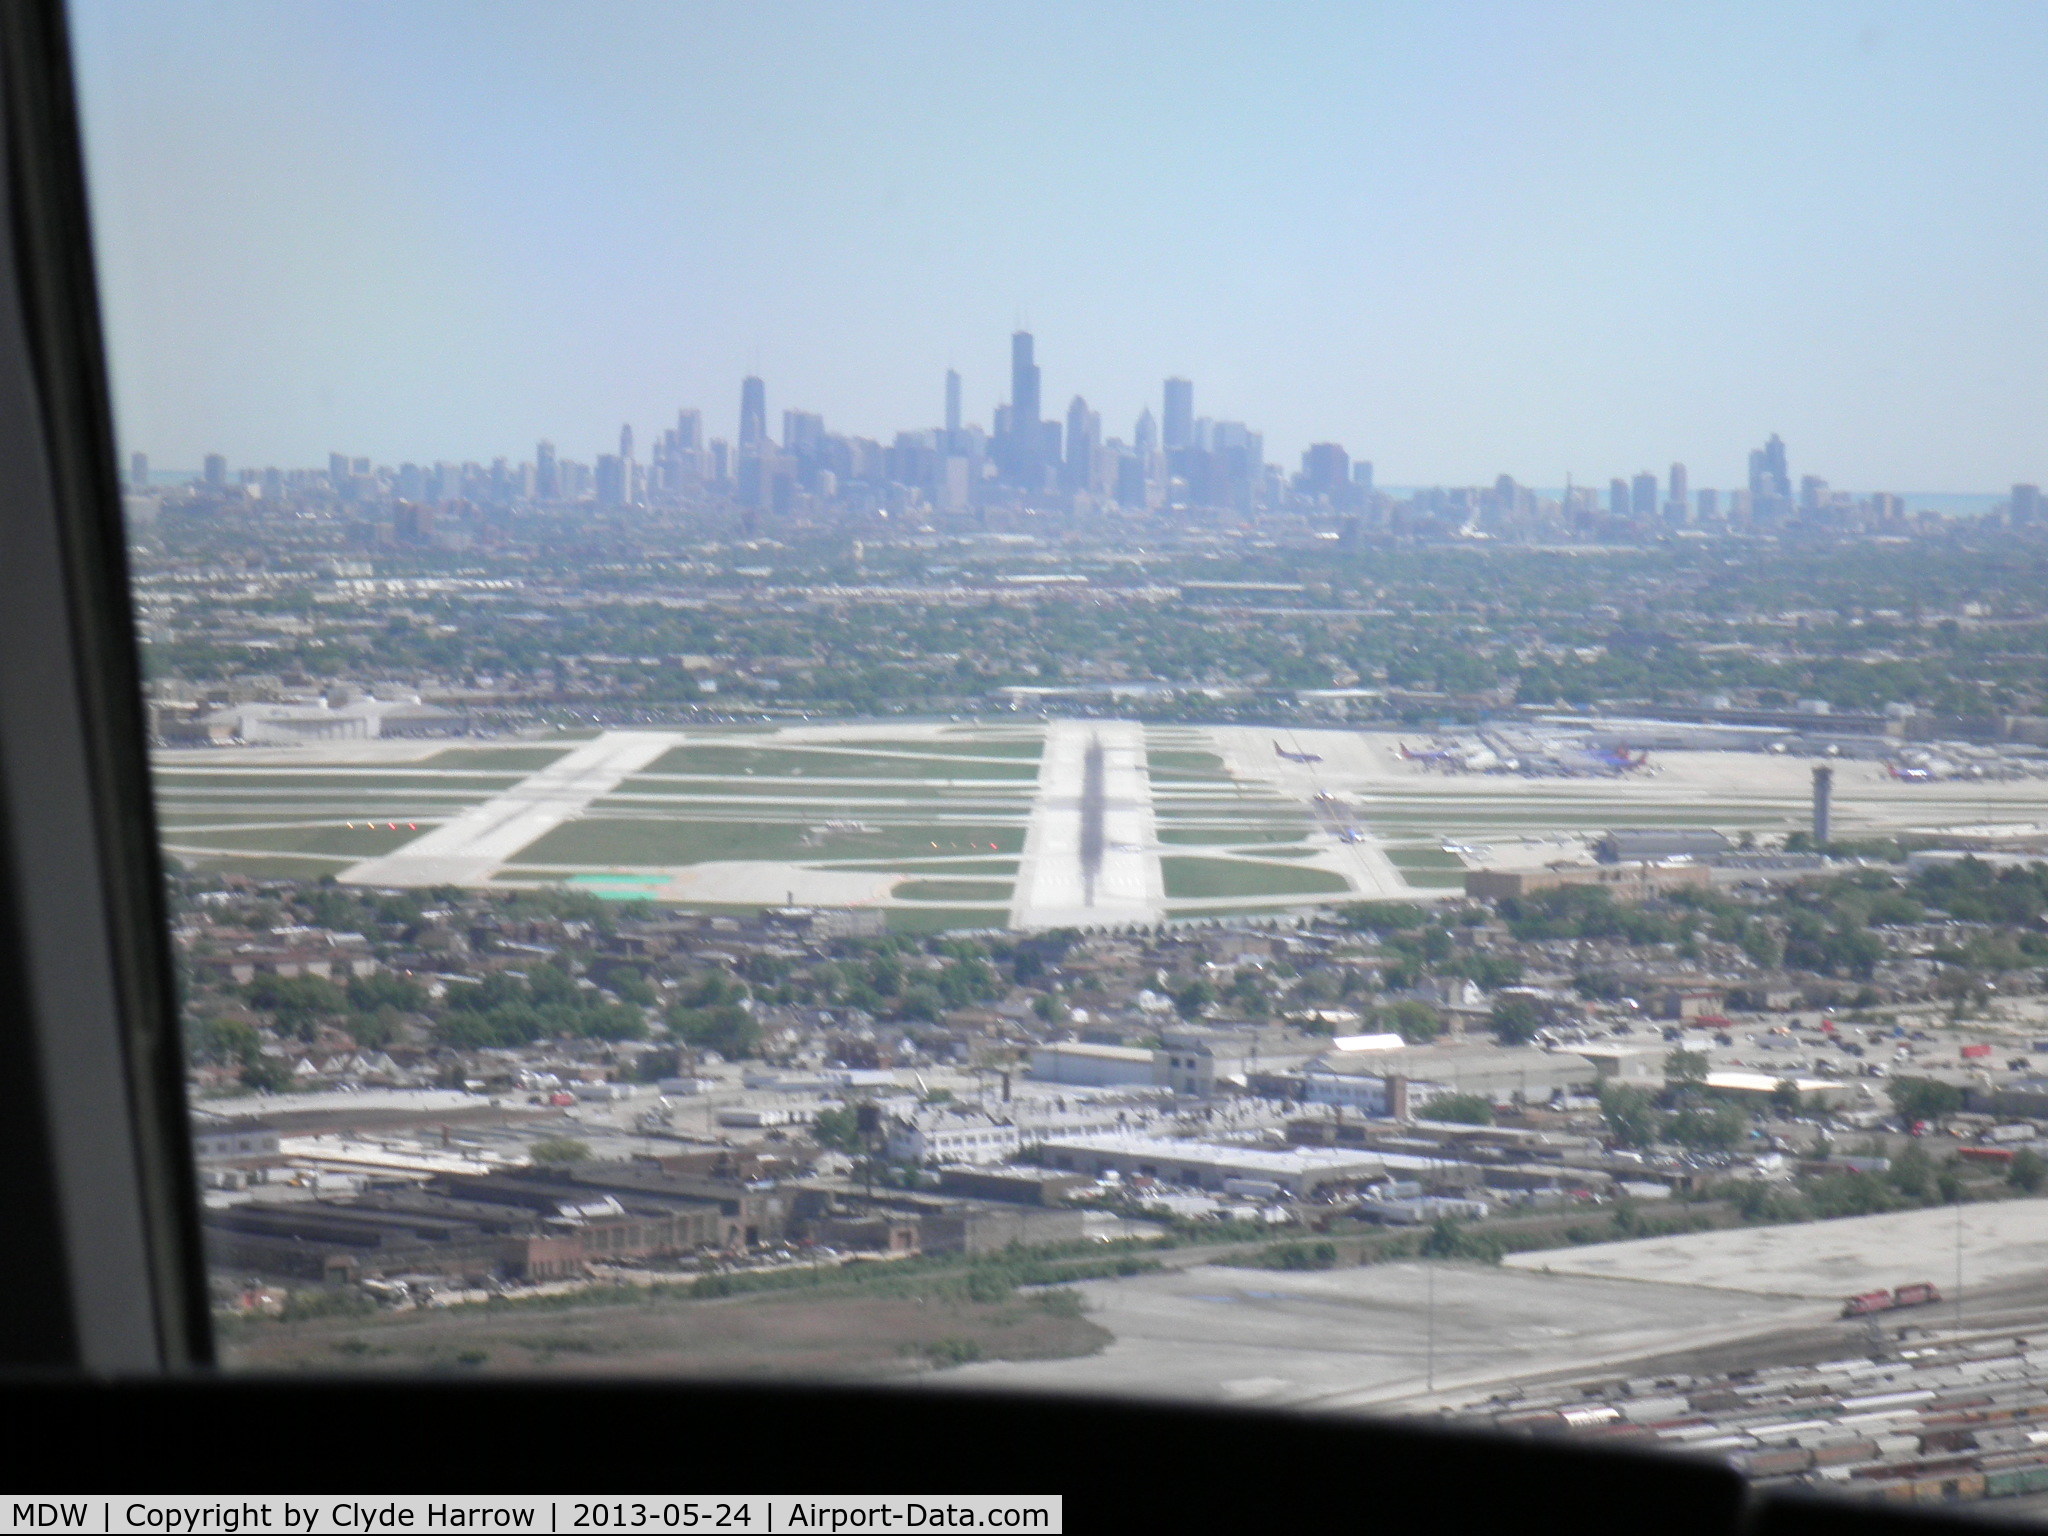 Chicago Midway International Airport (MDW) - On final to MDW